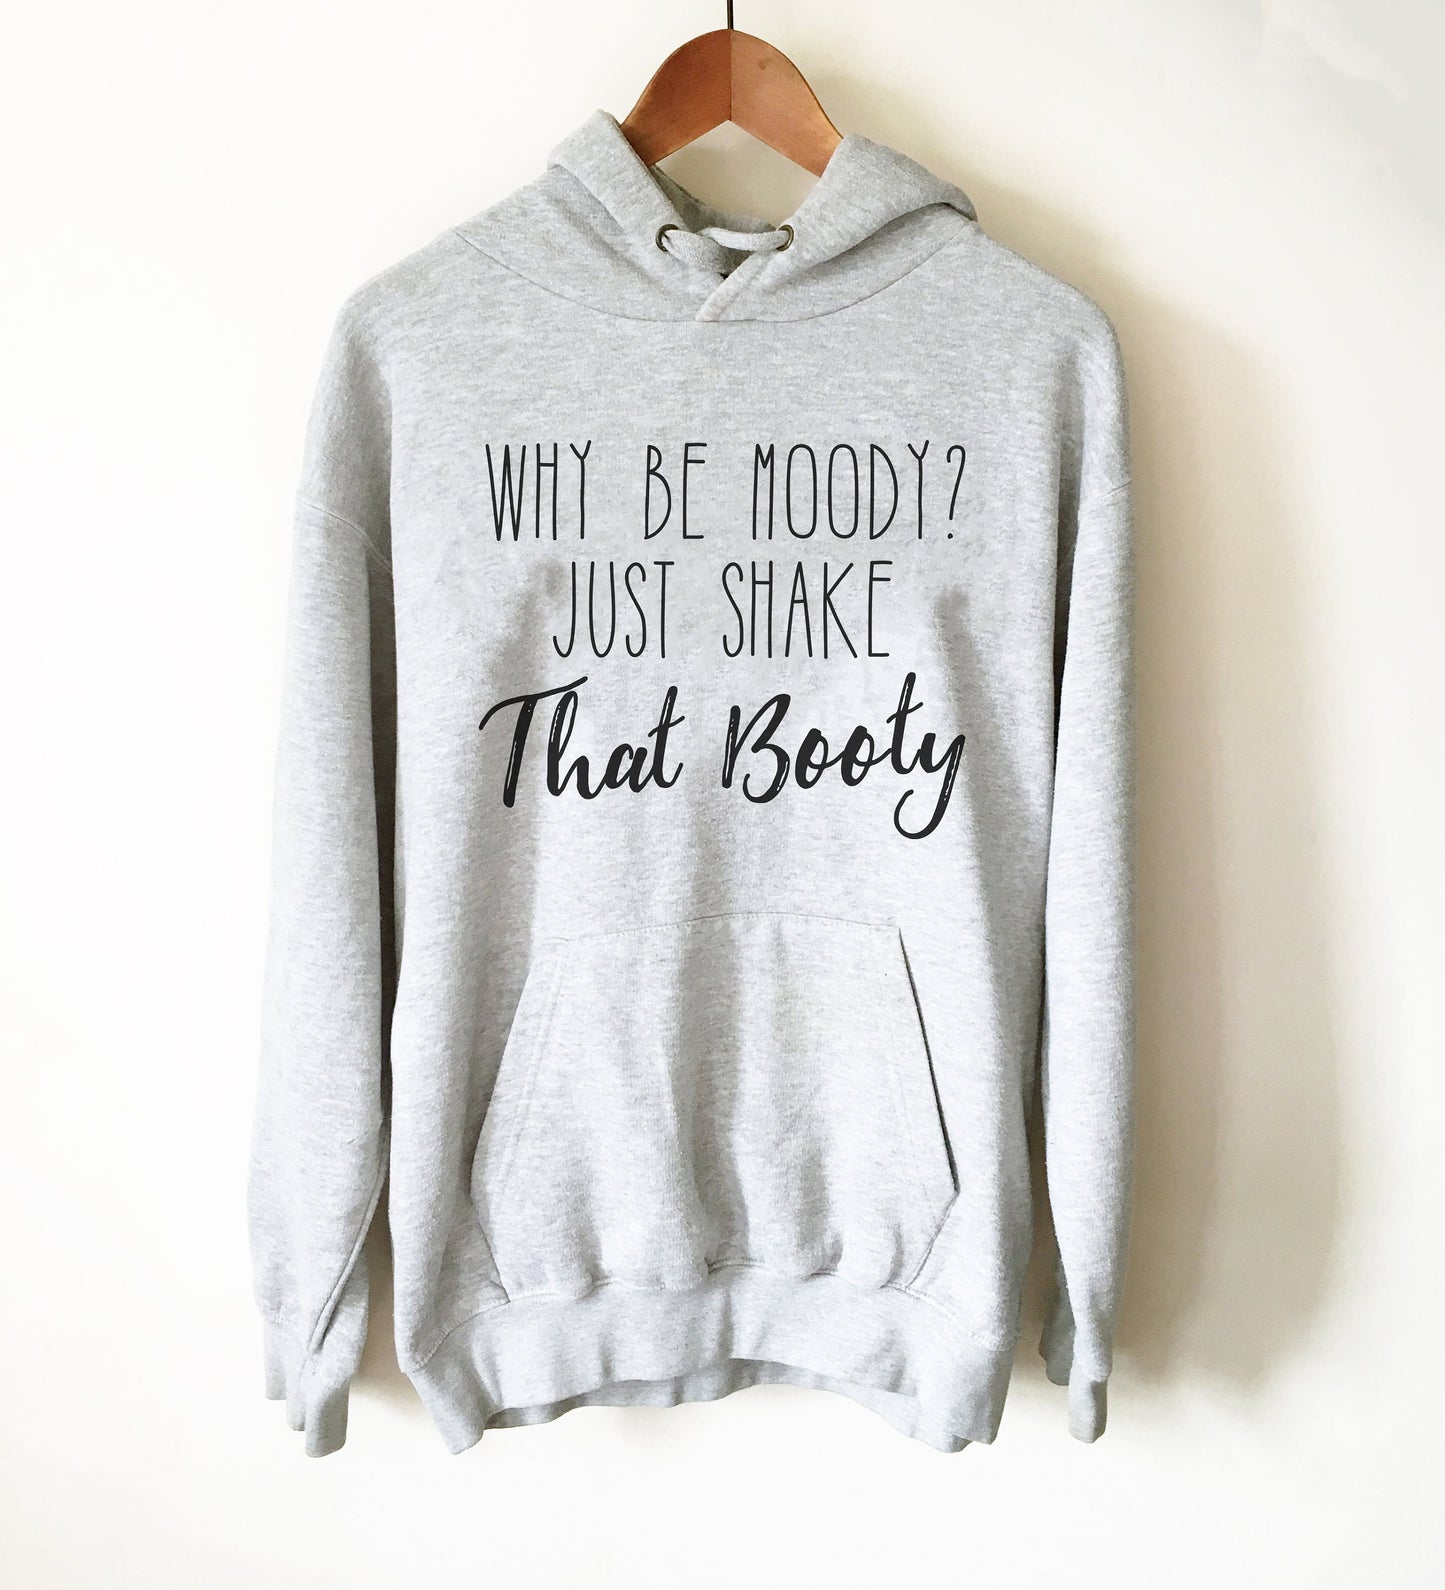 Why Be Moody Just Shake That Booty Hoodie - Pole Dance Shirt, Pole Dance Gift, Pole Dance Wear, Pole Dancing, Pole Wear, Costume Pole Dance